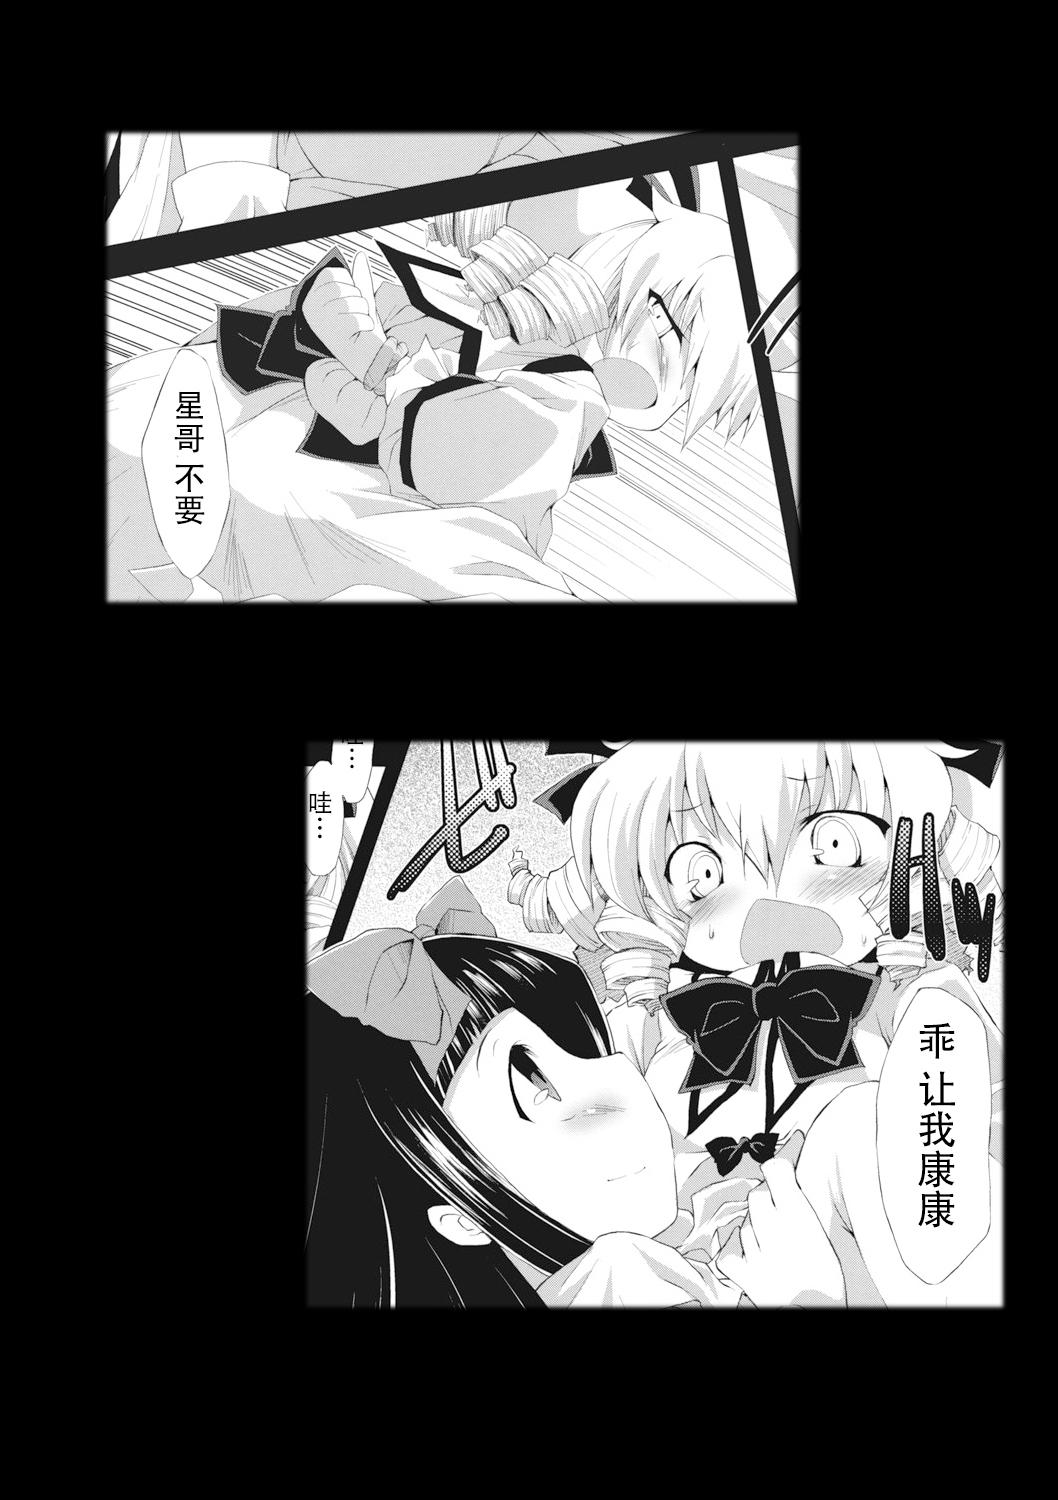 Butts Saimin Ihen Ichi - BRIGHTNESS DARKNESS ANOTHER - Touhou project Public Fuck - Page 33